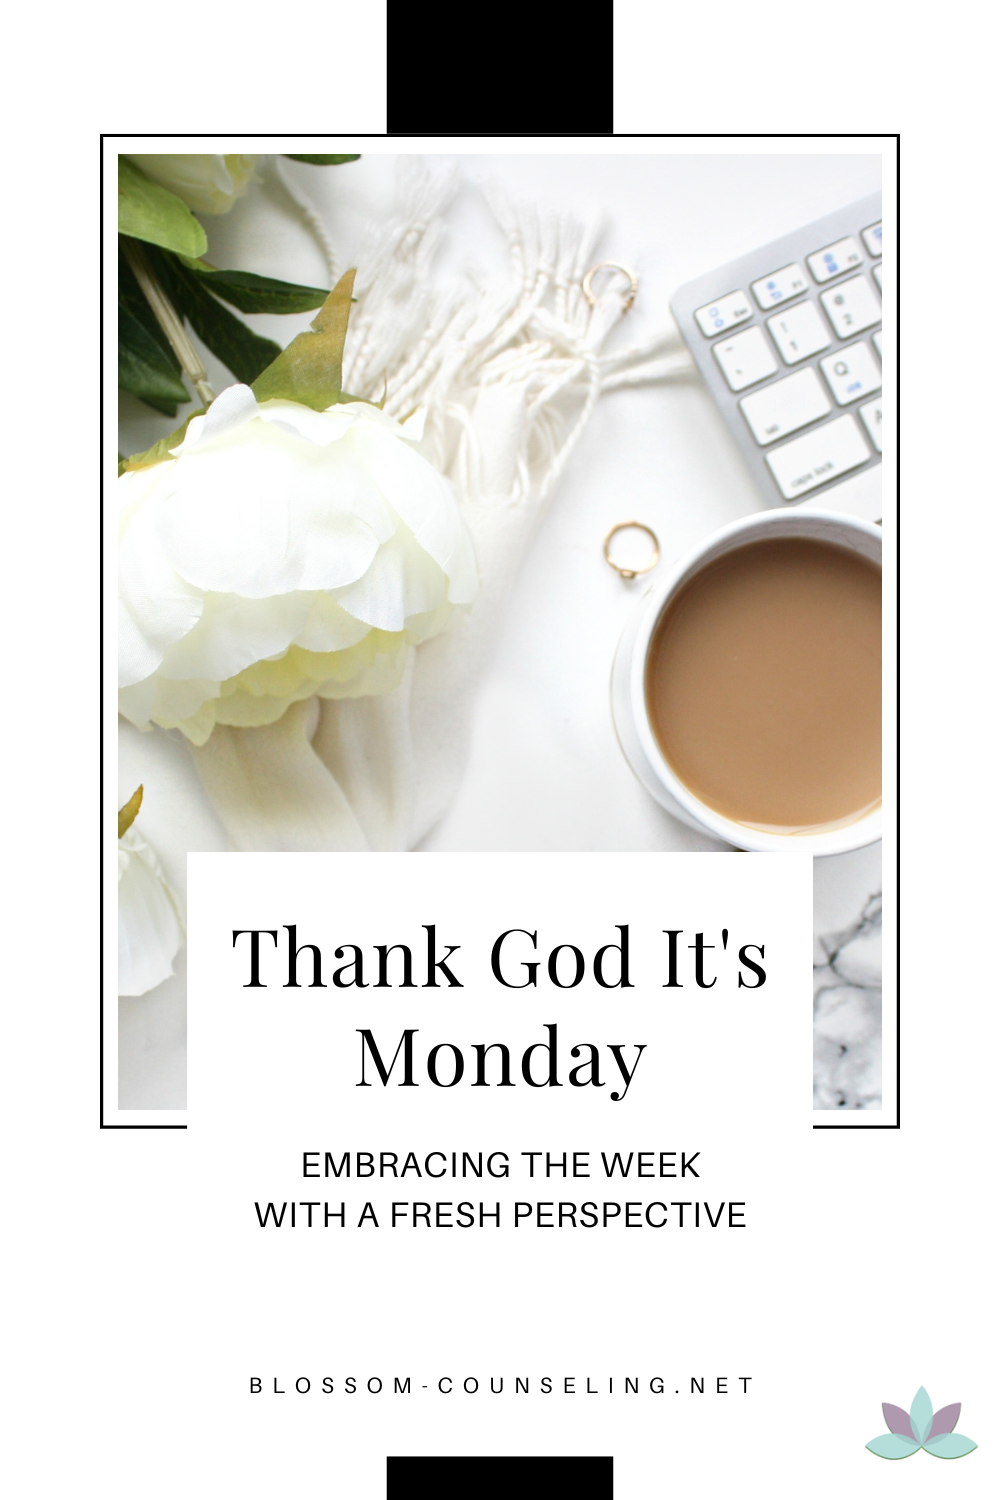 Thank God It's Monday: Embracing the Week with a Fresh Perspective